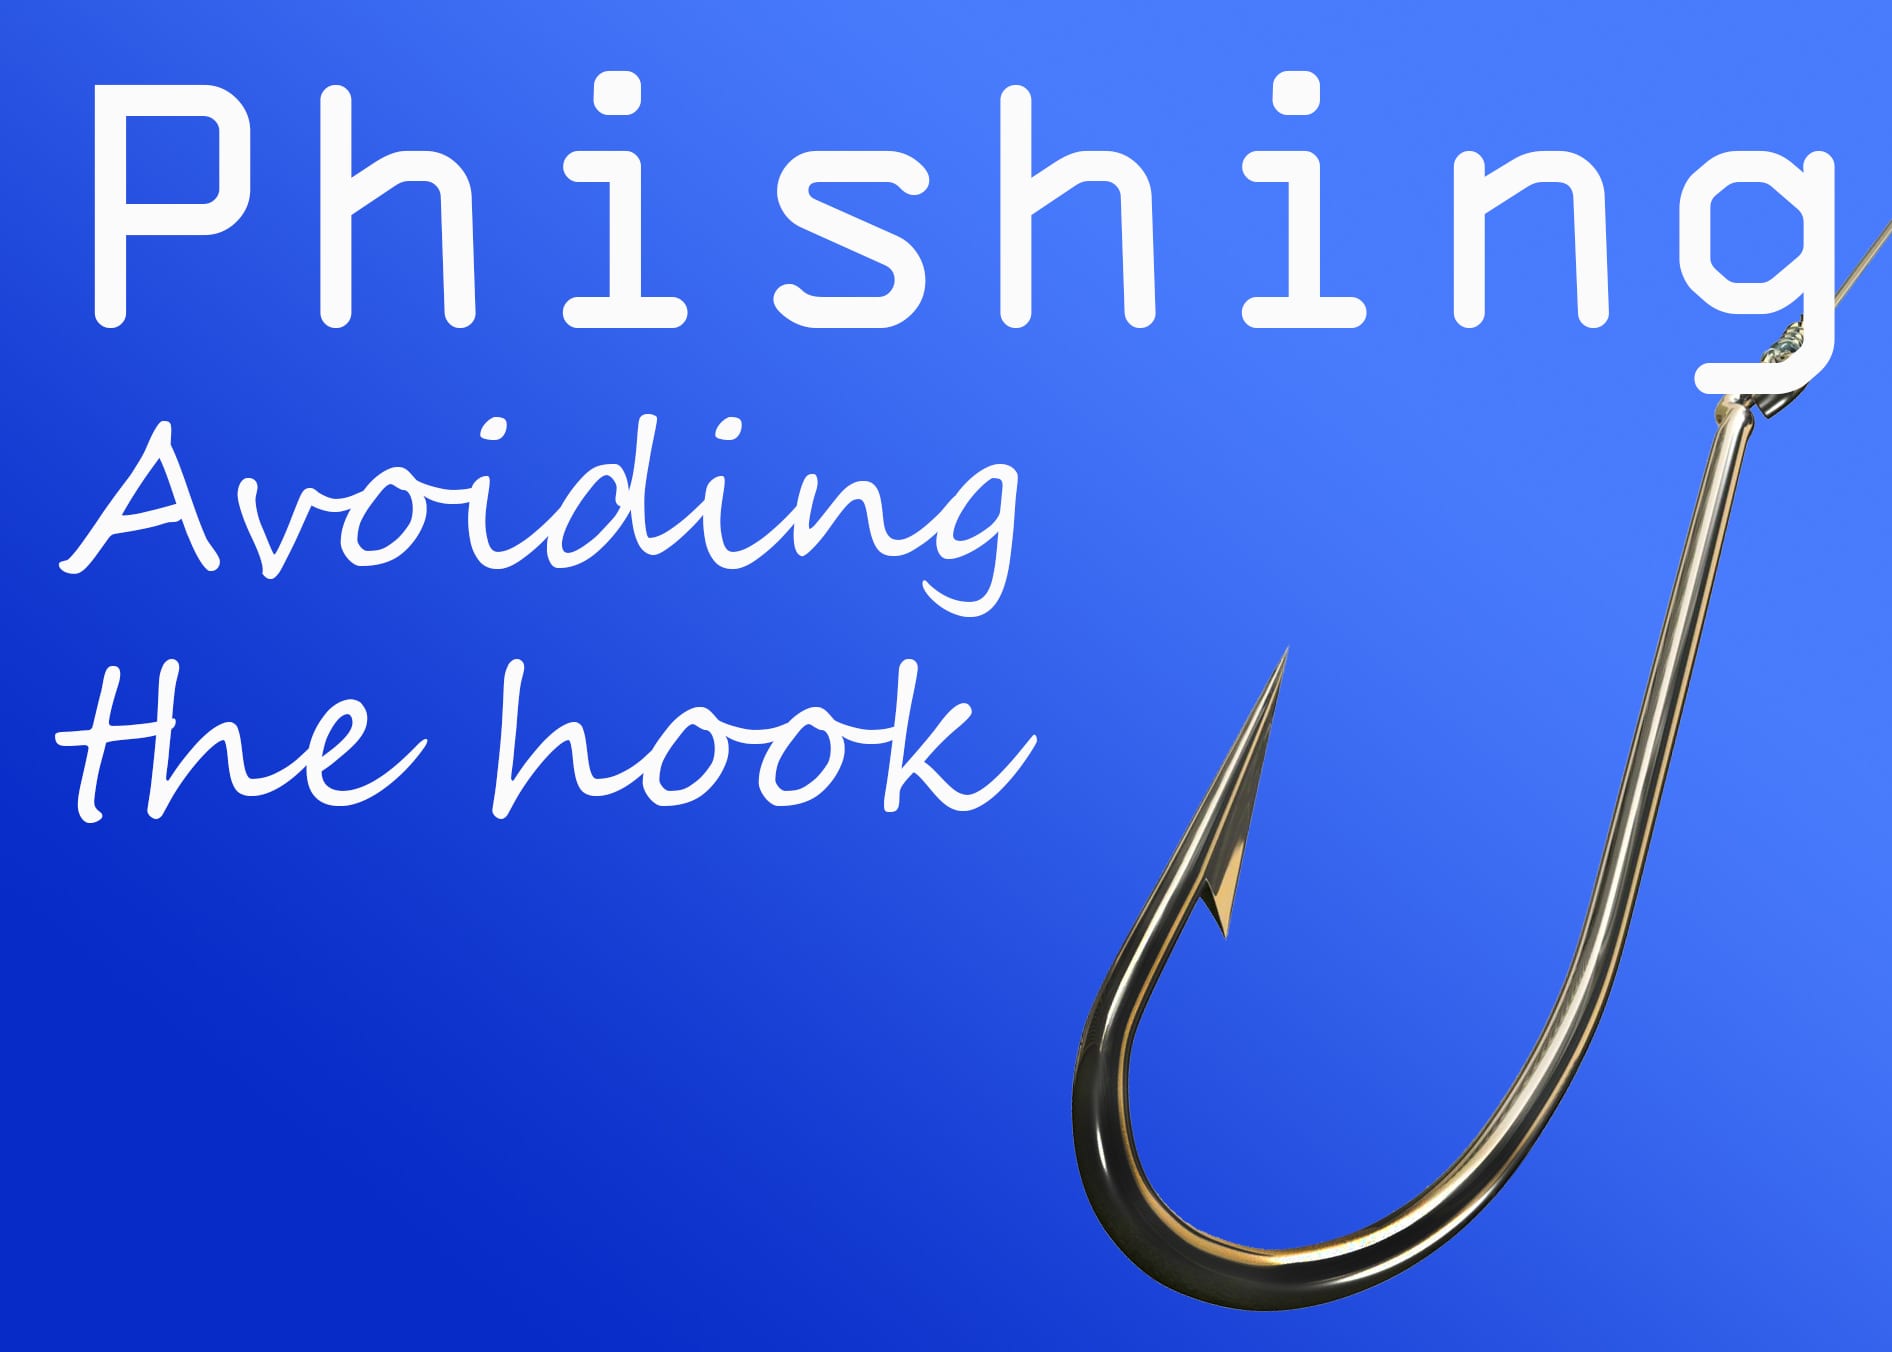 fishing hook with "Phishing Avoid the hook" text.